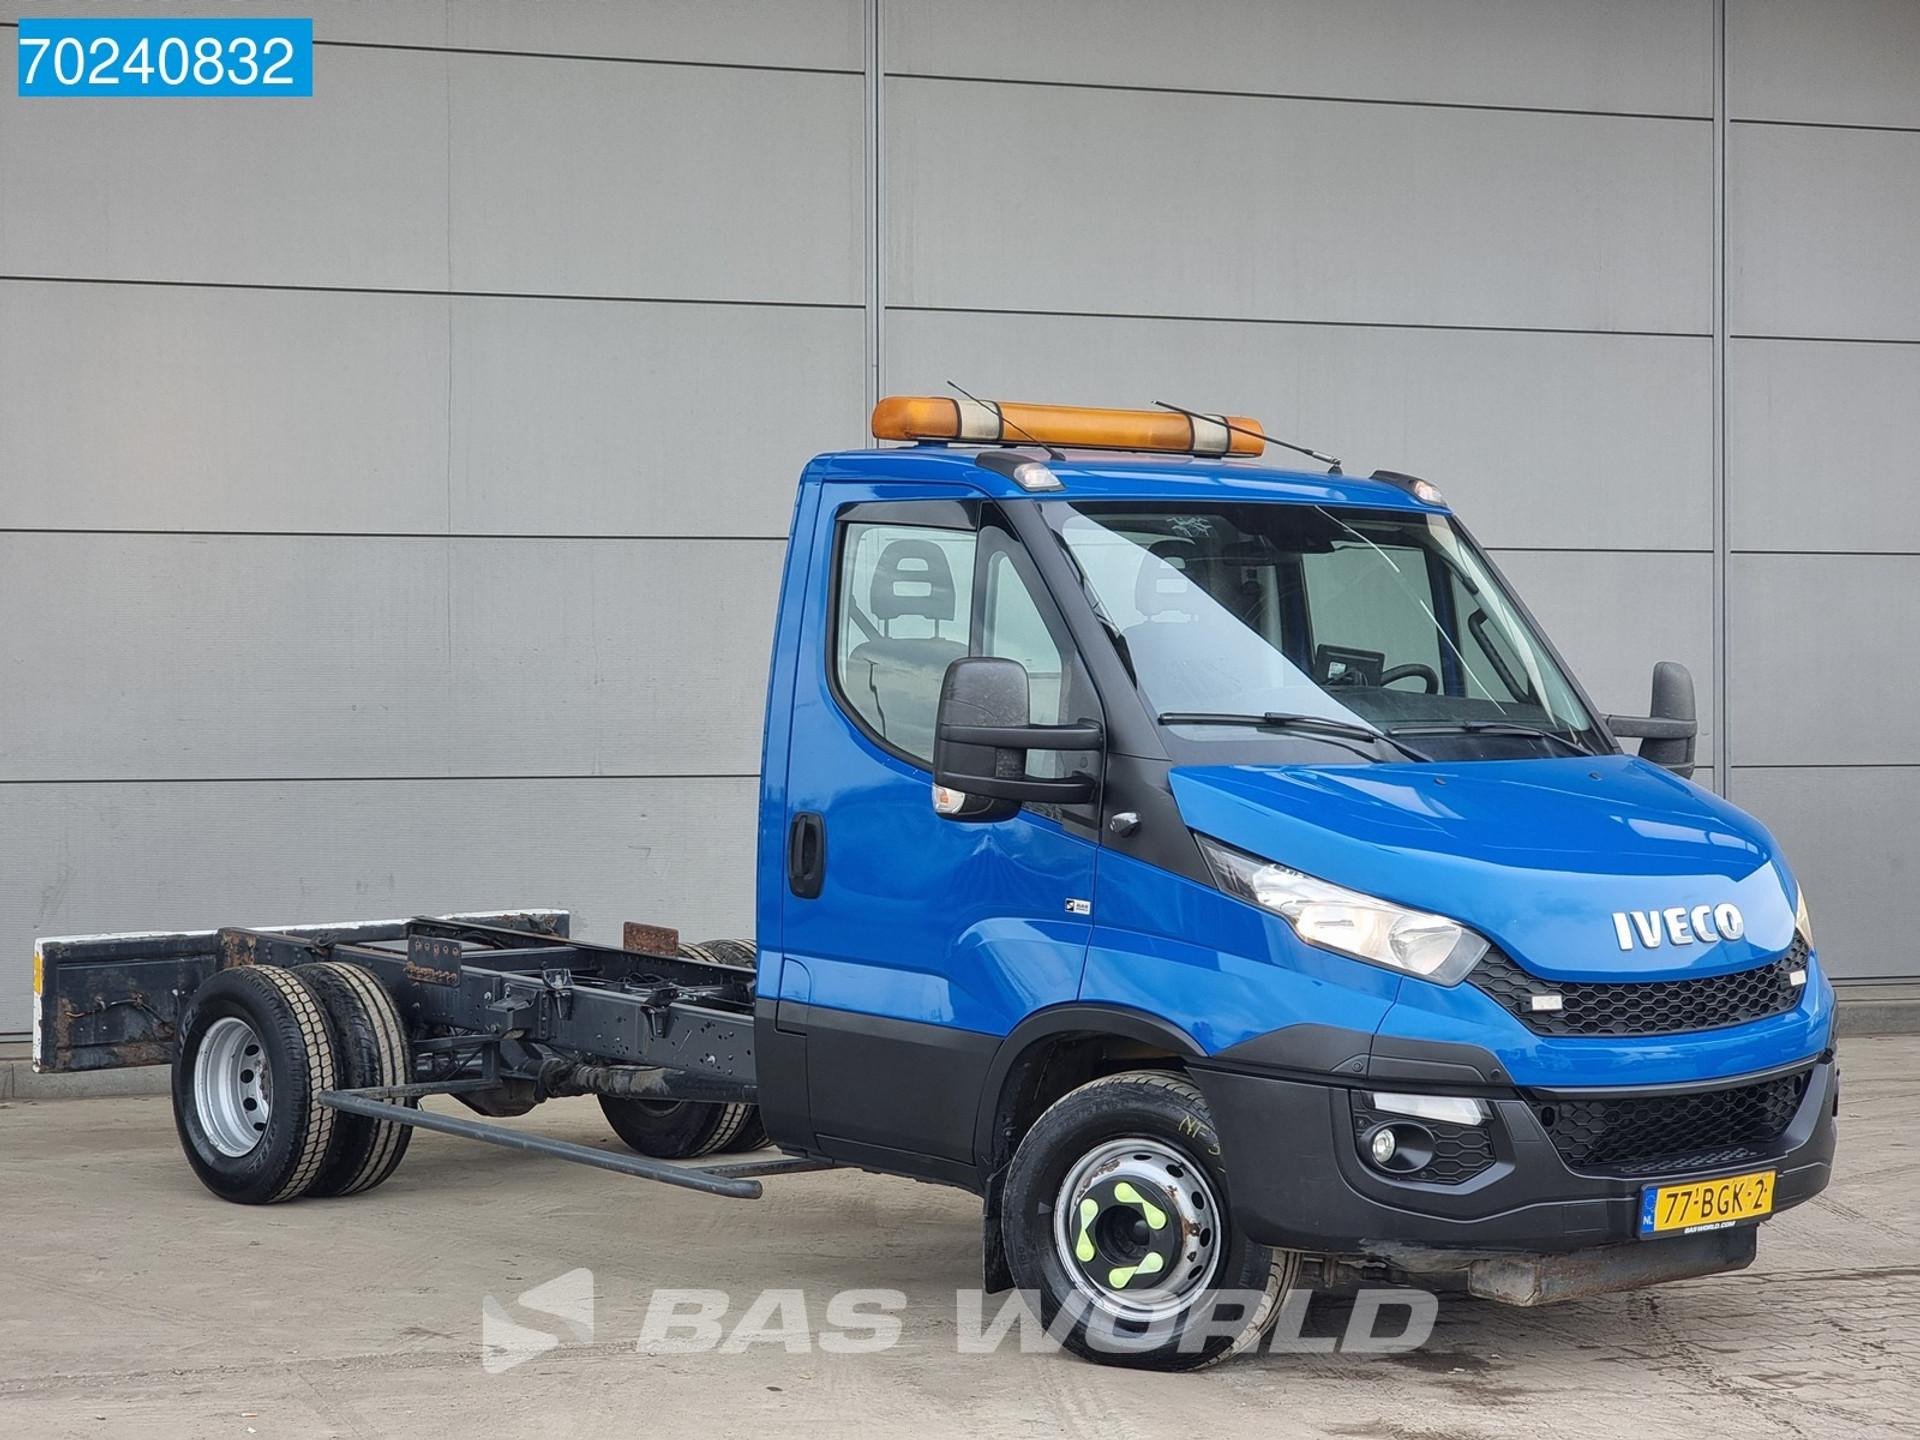 Foto 5 van Iveco Daily 70C21 3.0L 210PK 375cm wheelbase Luchtvering Chassis Cabine Fahrgestell Platform Airco Cruise control